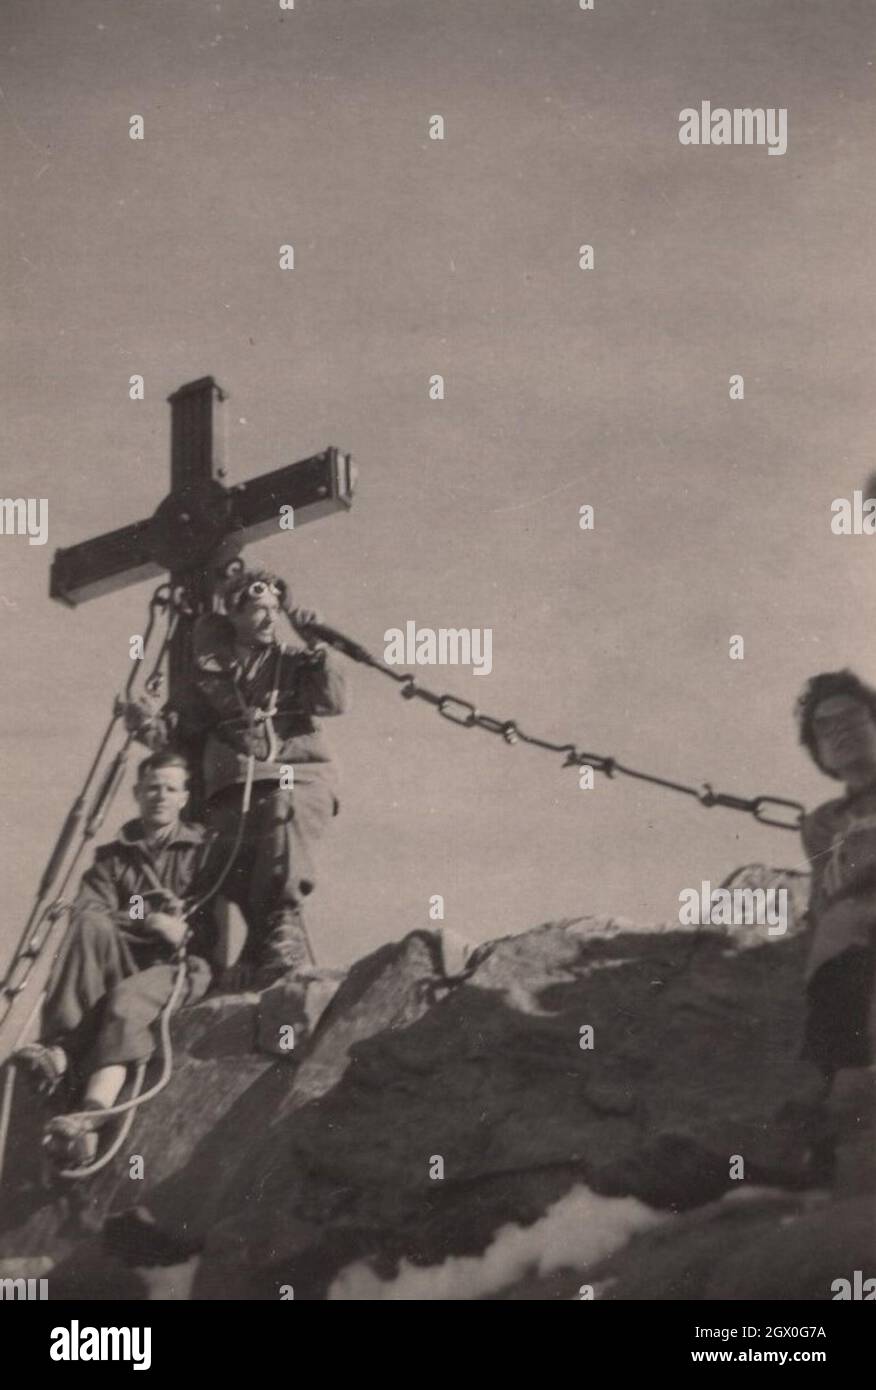 Super rare antique vintage photograph about three climbers from the 1910's. These gentlemen are heros because there are not mountain high enough for them to get over it and stand a  Christian Cross to show the world to we reached and occupied this peak. The Mountain was fallen in this battle. Source : Original photograph Stock Photo